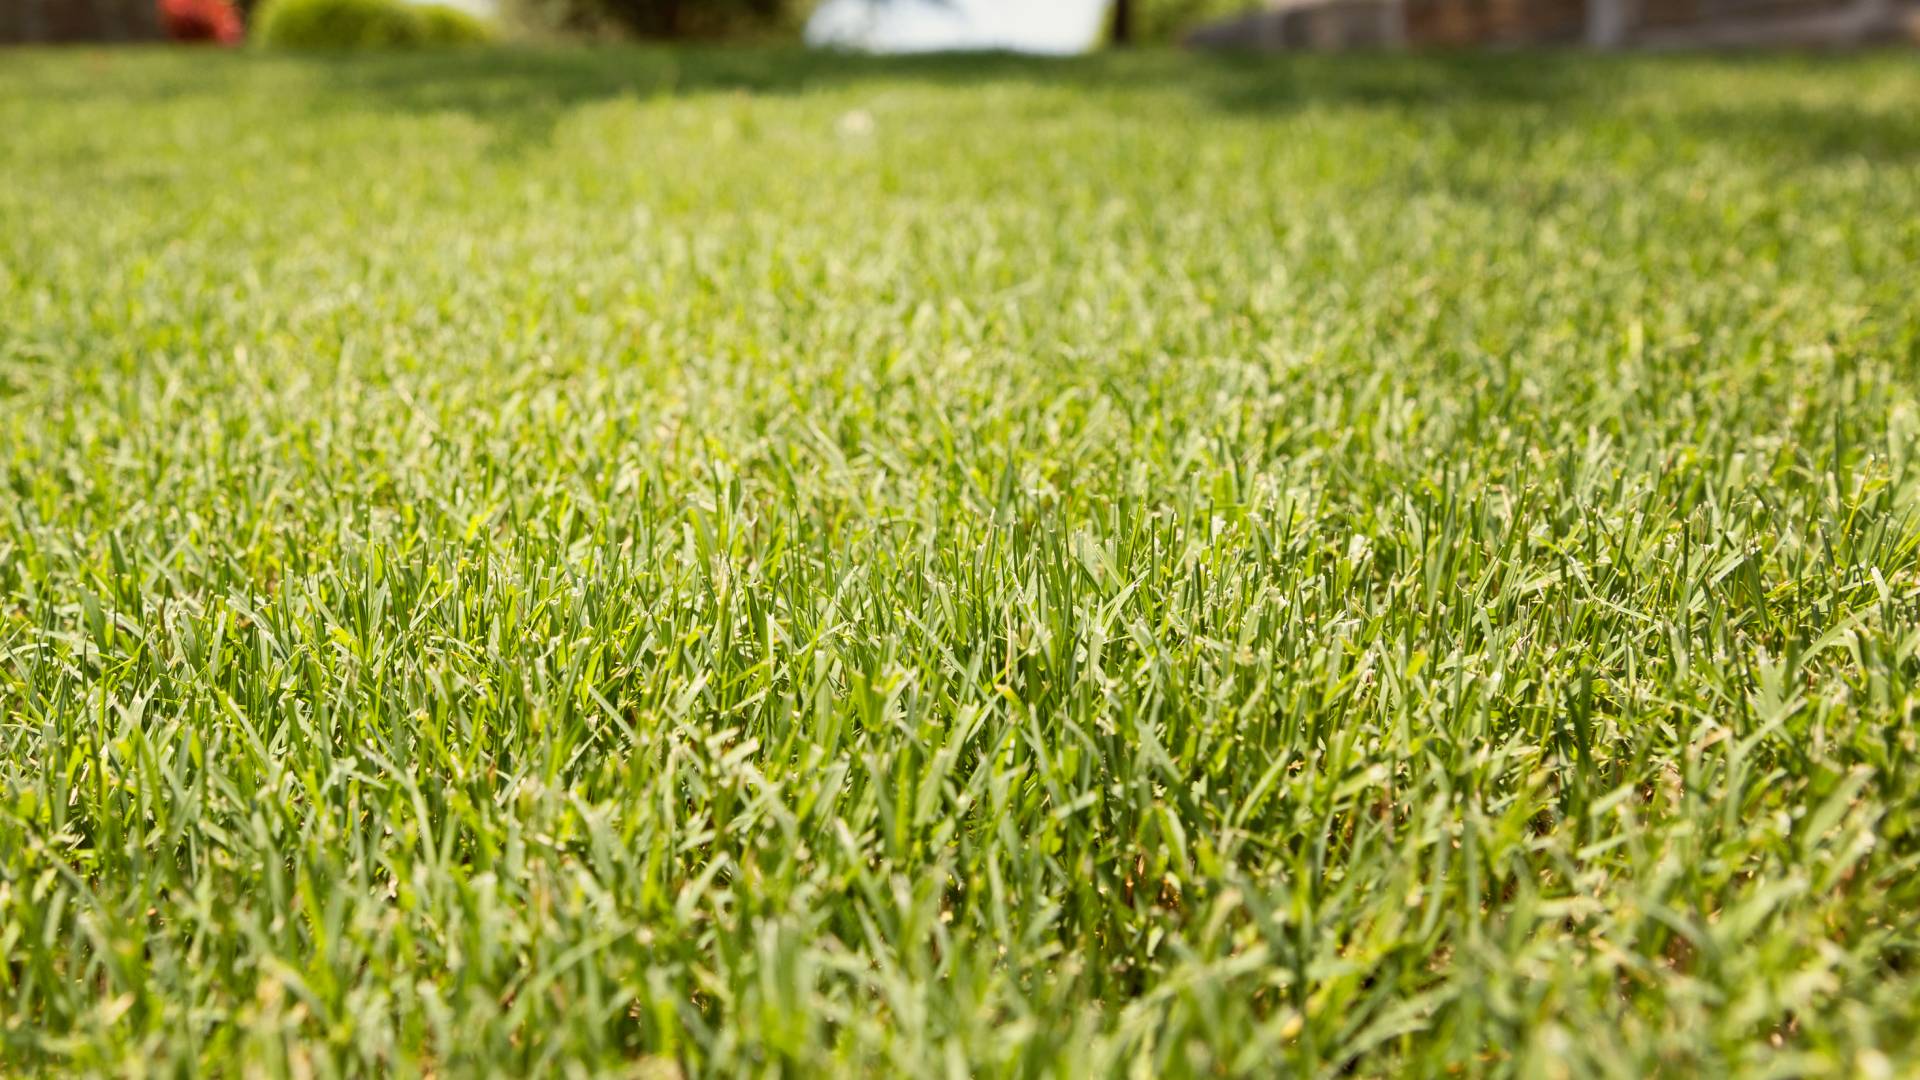 Healthy lawn due to services done by Cititurf in McKinney, TX.